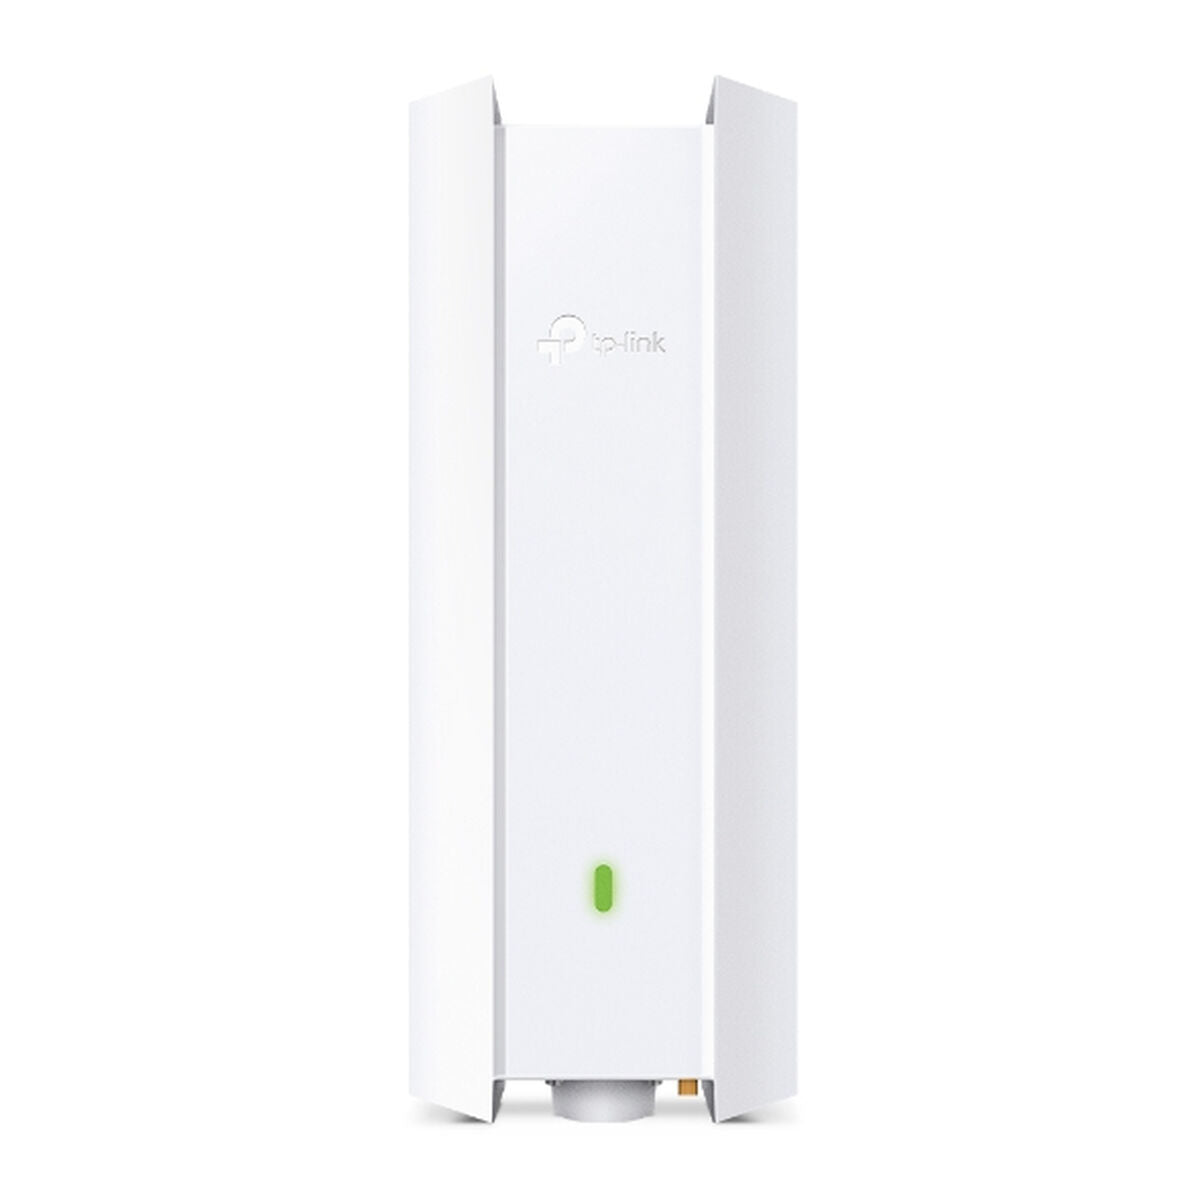 Access point TP-Link OMADA EAP610 White Black, TP-Link, Computing, Network devices, access-point-tp-link-omada-eap610-white-black, Brand_TP-Link, category-reference-2609, category-reference-2803, category-reference-2820, category-reference-t-19685, category-reference-t-19914, Condition_NEW, networks/wiring, Price_100 - 200, Teleworking, RiotNook